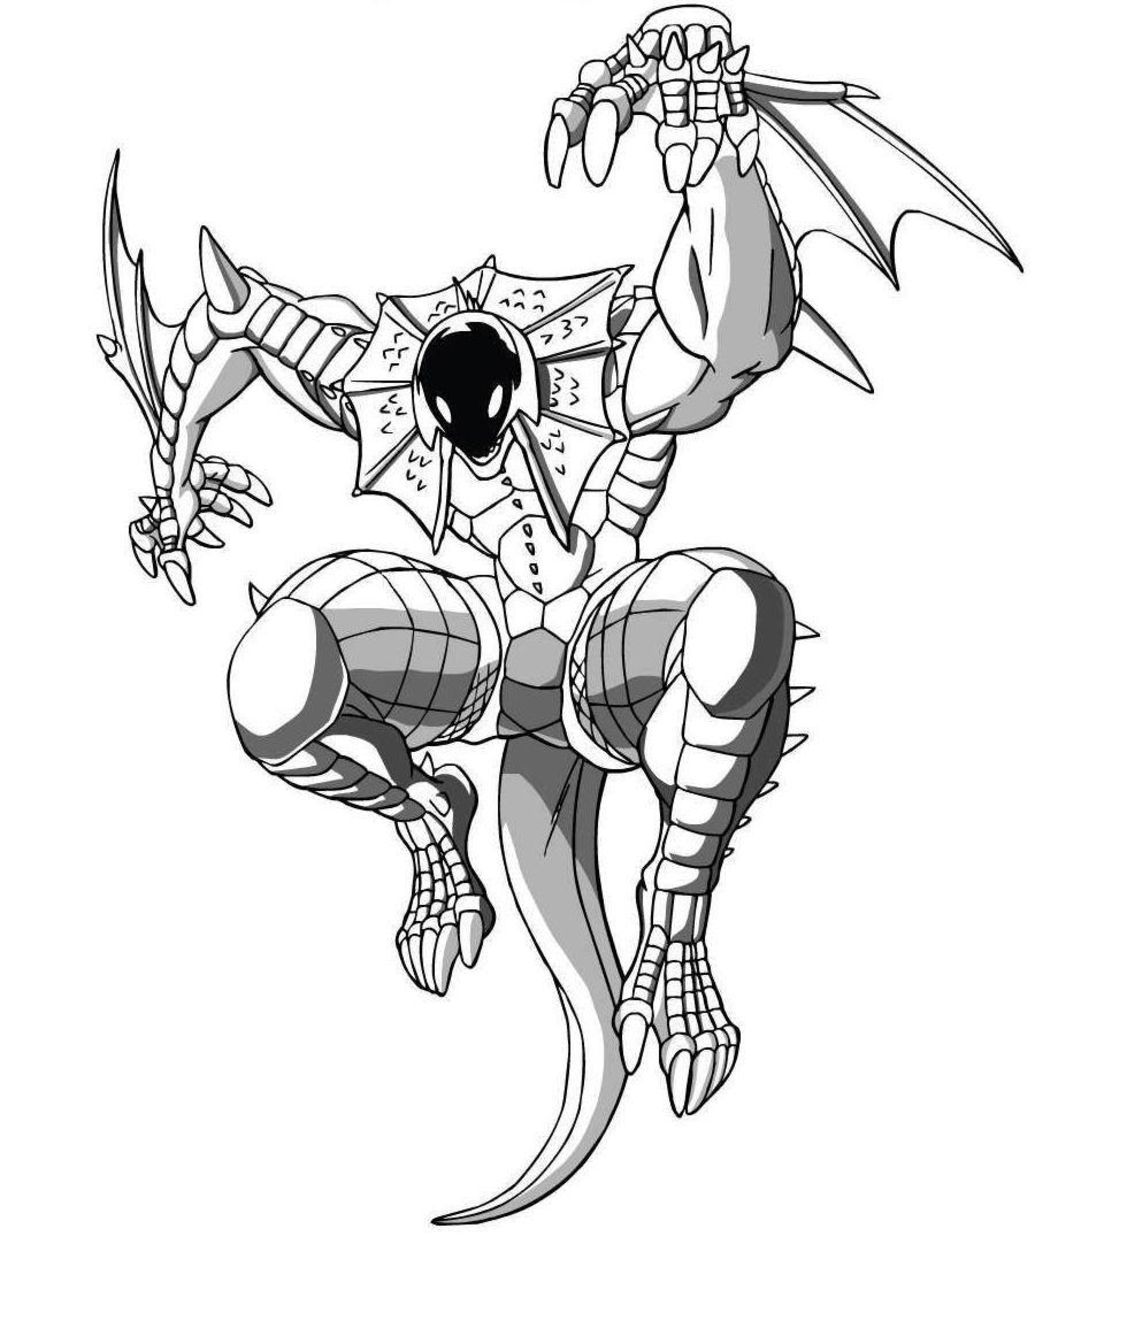 Bakugan coloring pages to print for free - Bakugan Kids Coloring Pages